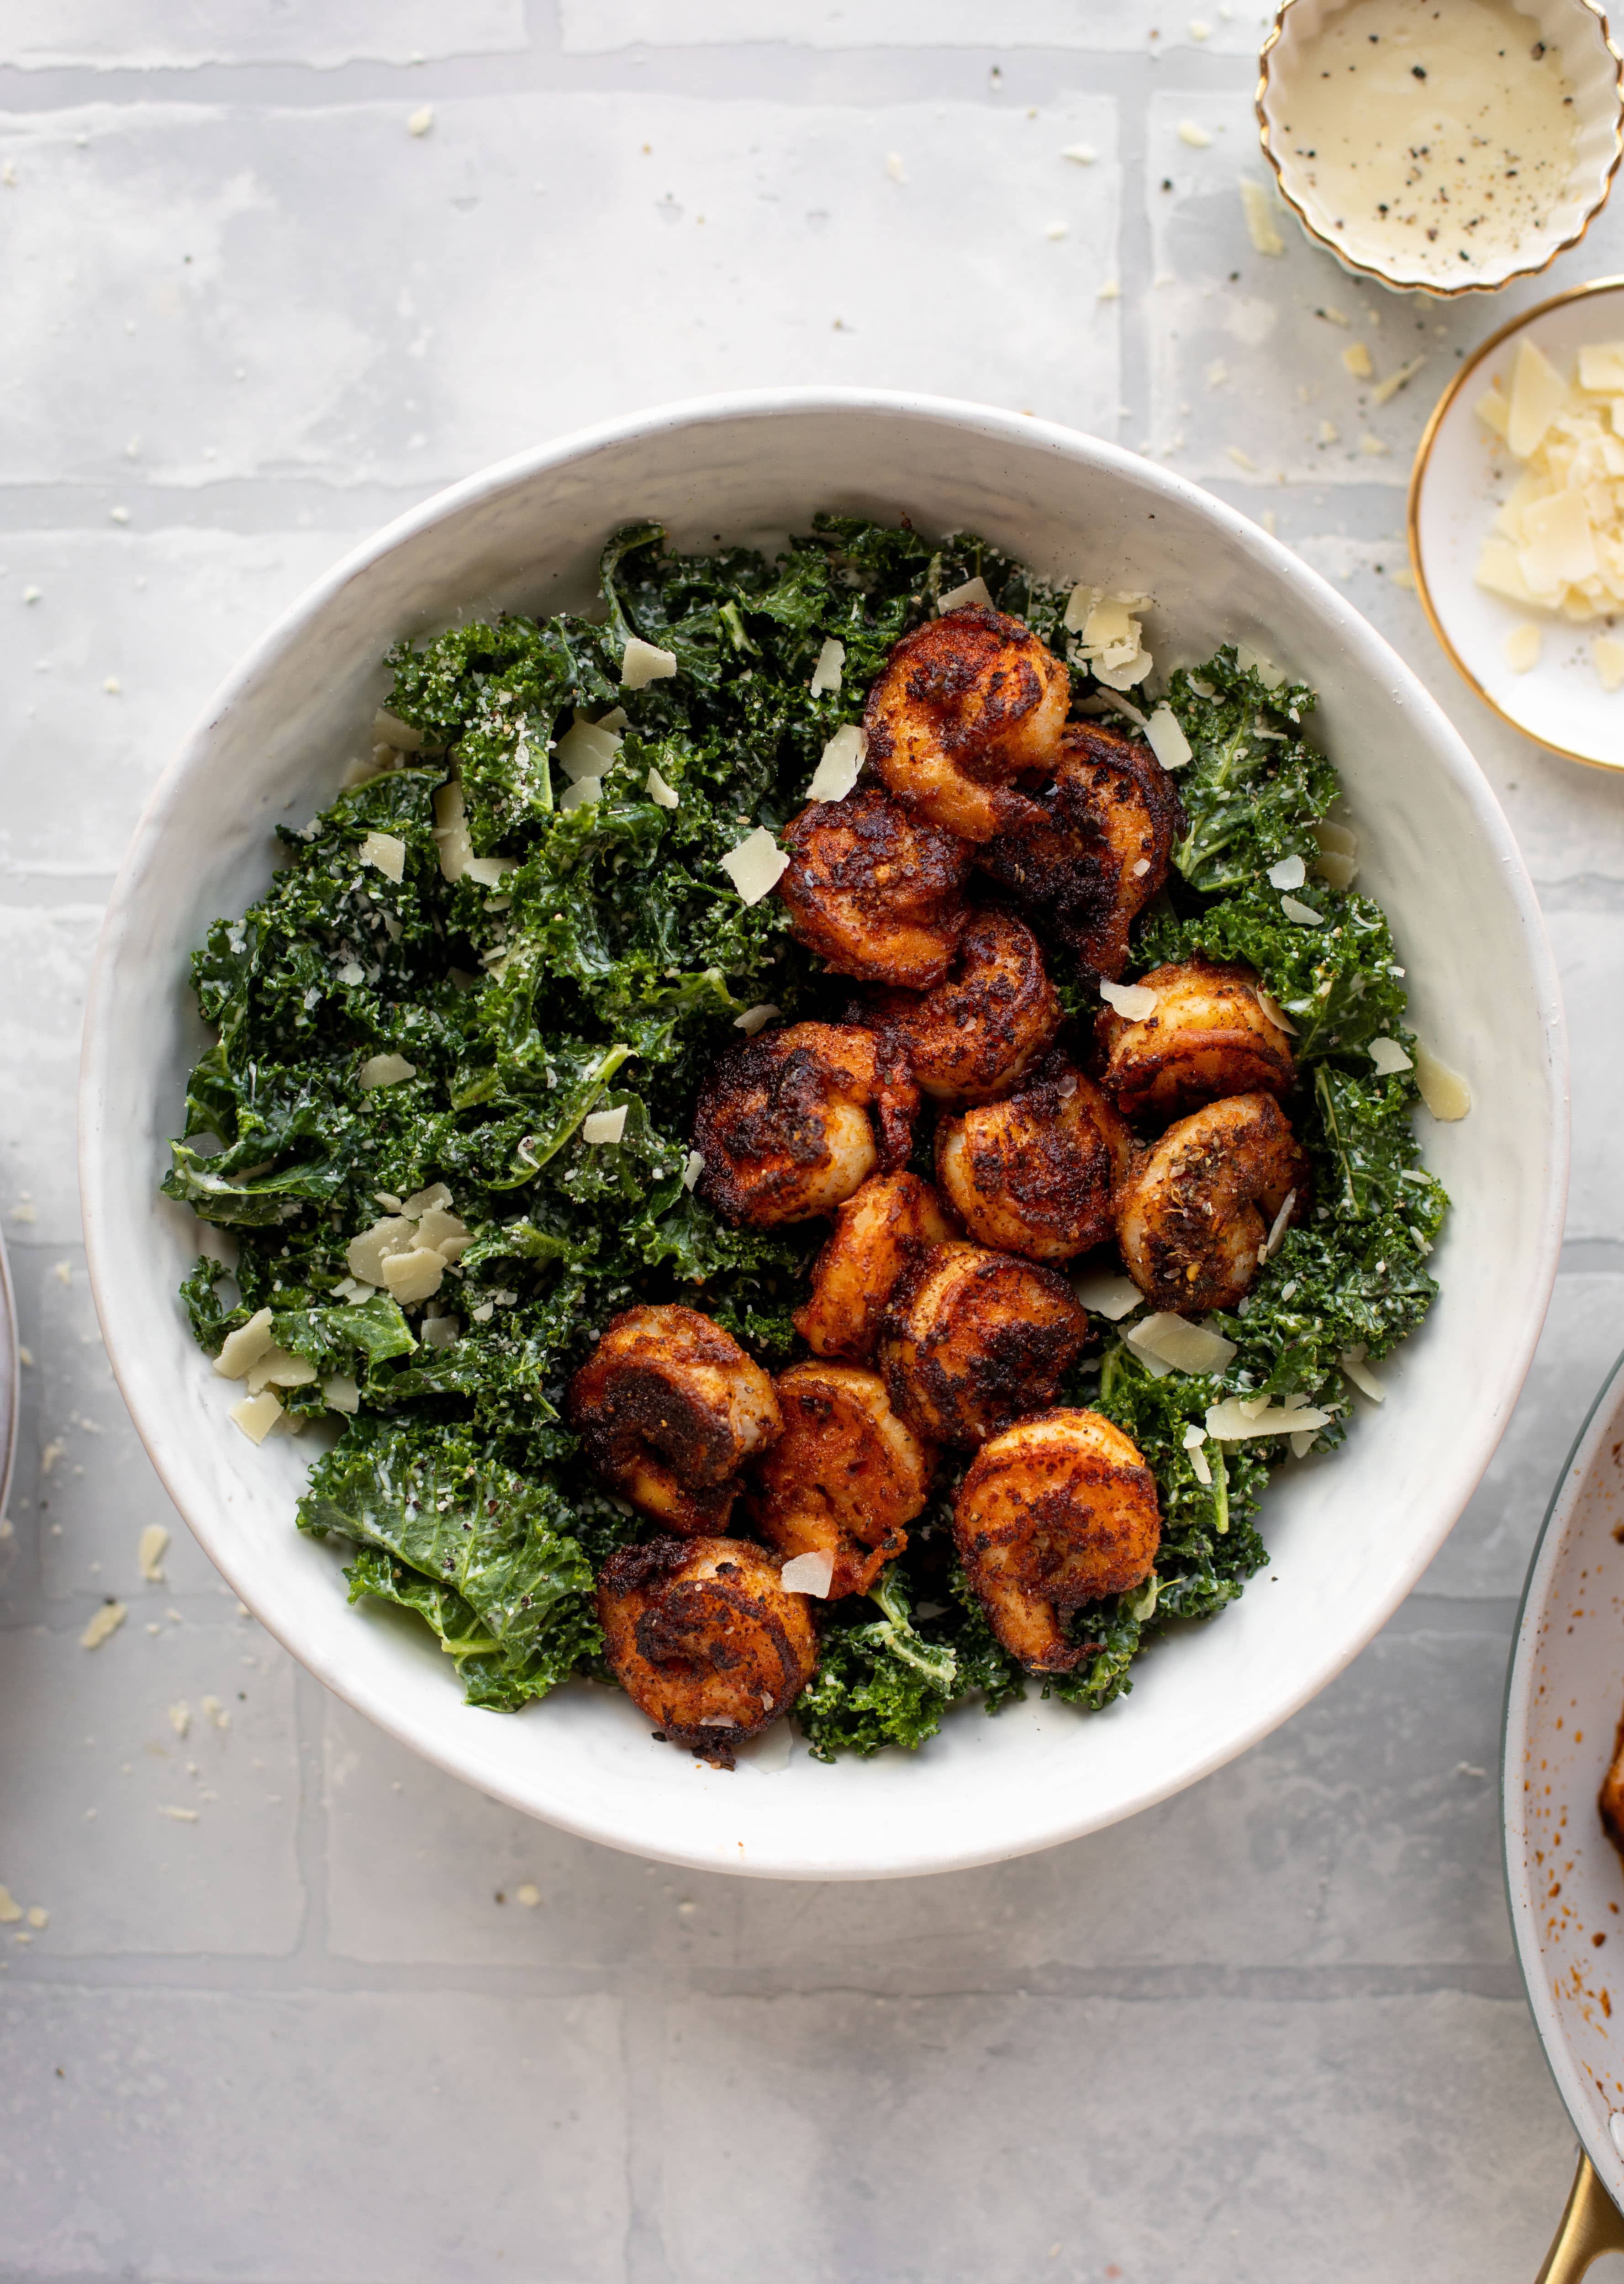 This blackened shrimp kale caesar is loaded with flavor. Spiced, buttery shrimp pan fried until golden, then thrown on kale caesar salad. Delish!